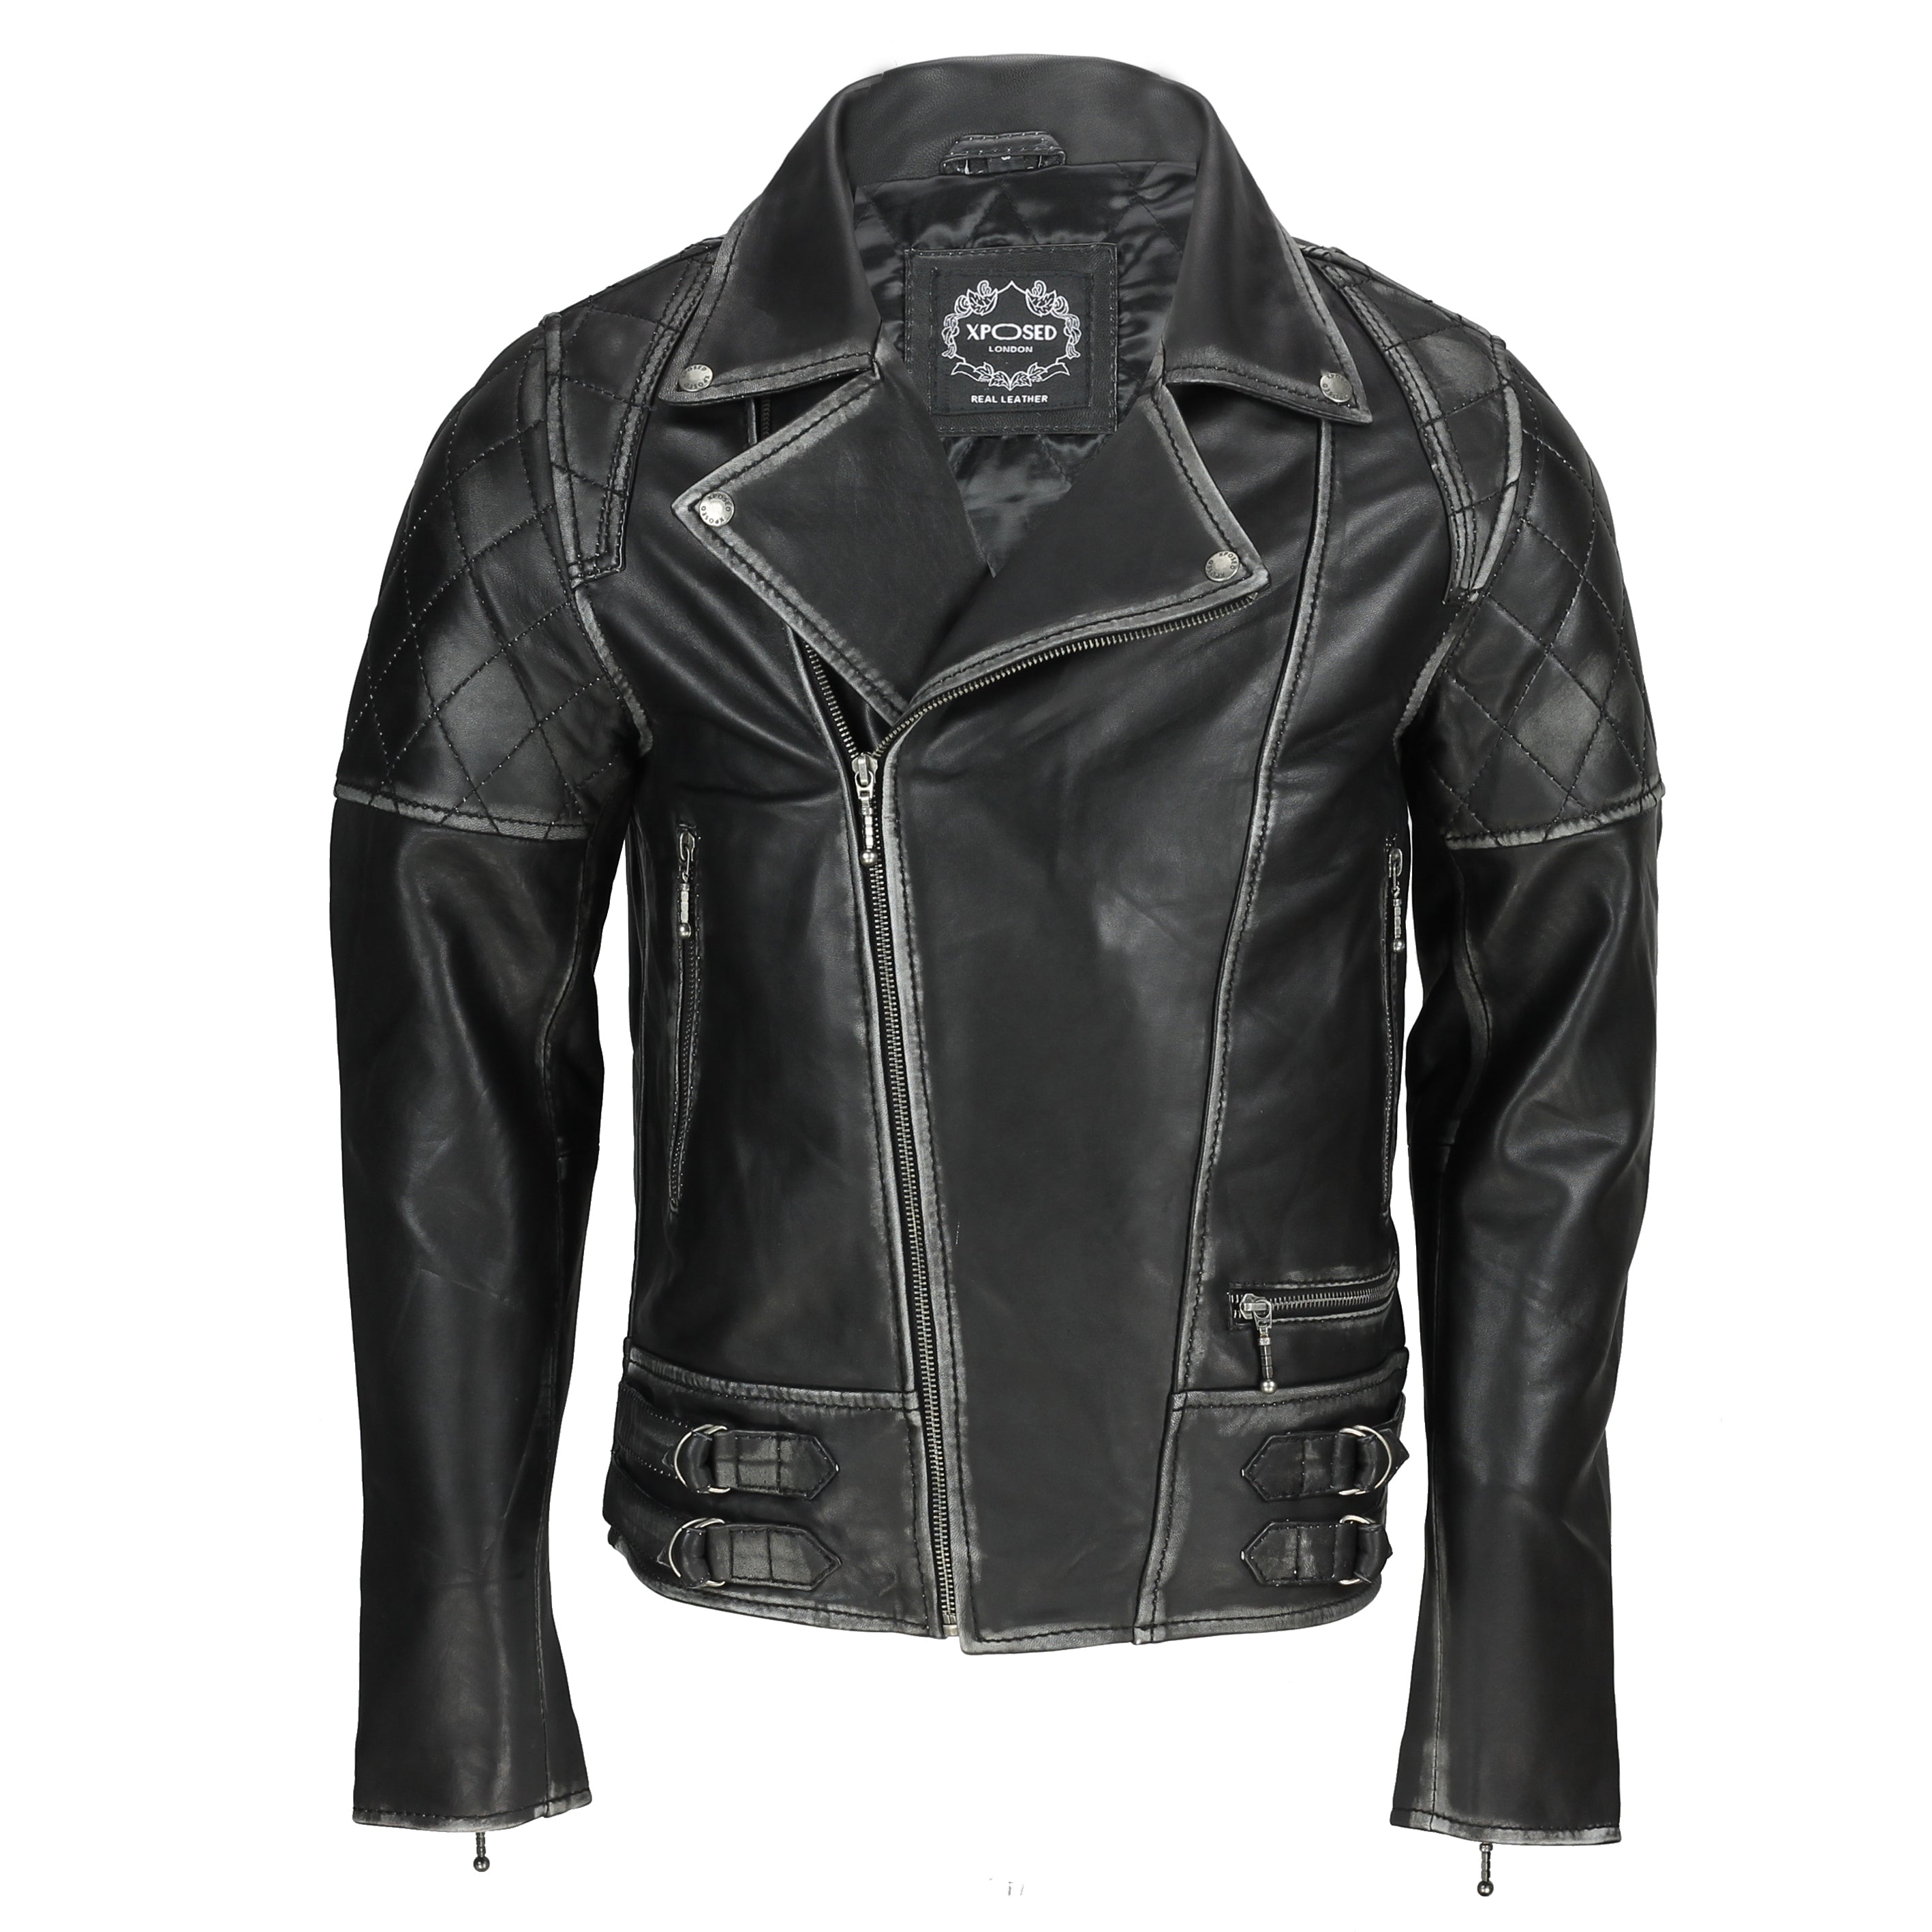 New Mens Vintage Real Leather Biker Jacket in Washed Black Zipped Smart Casual